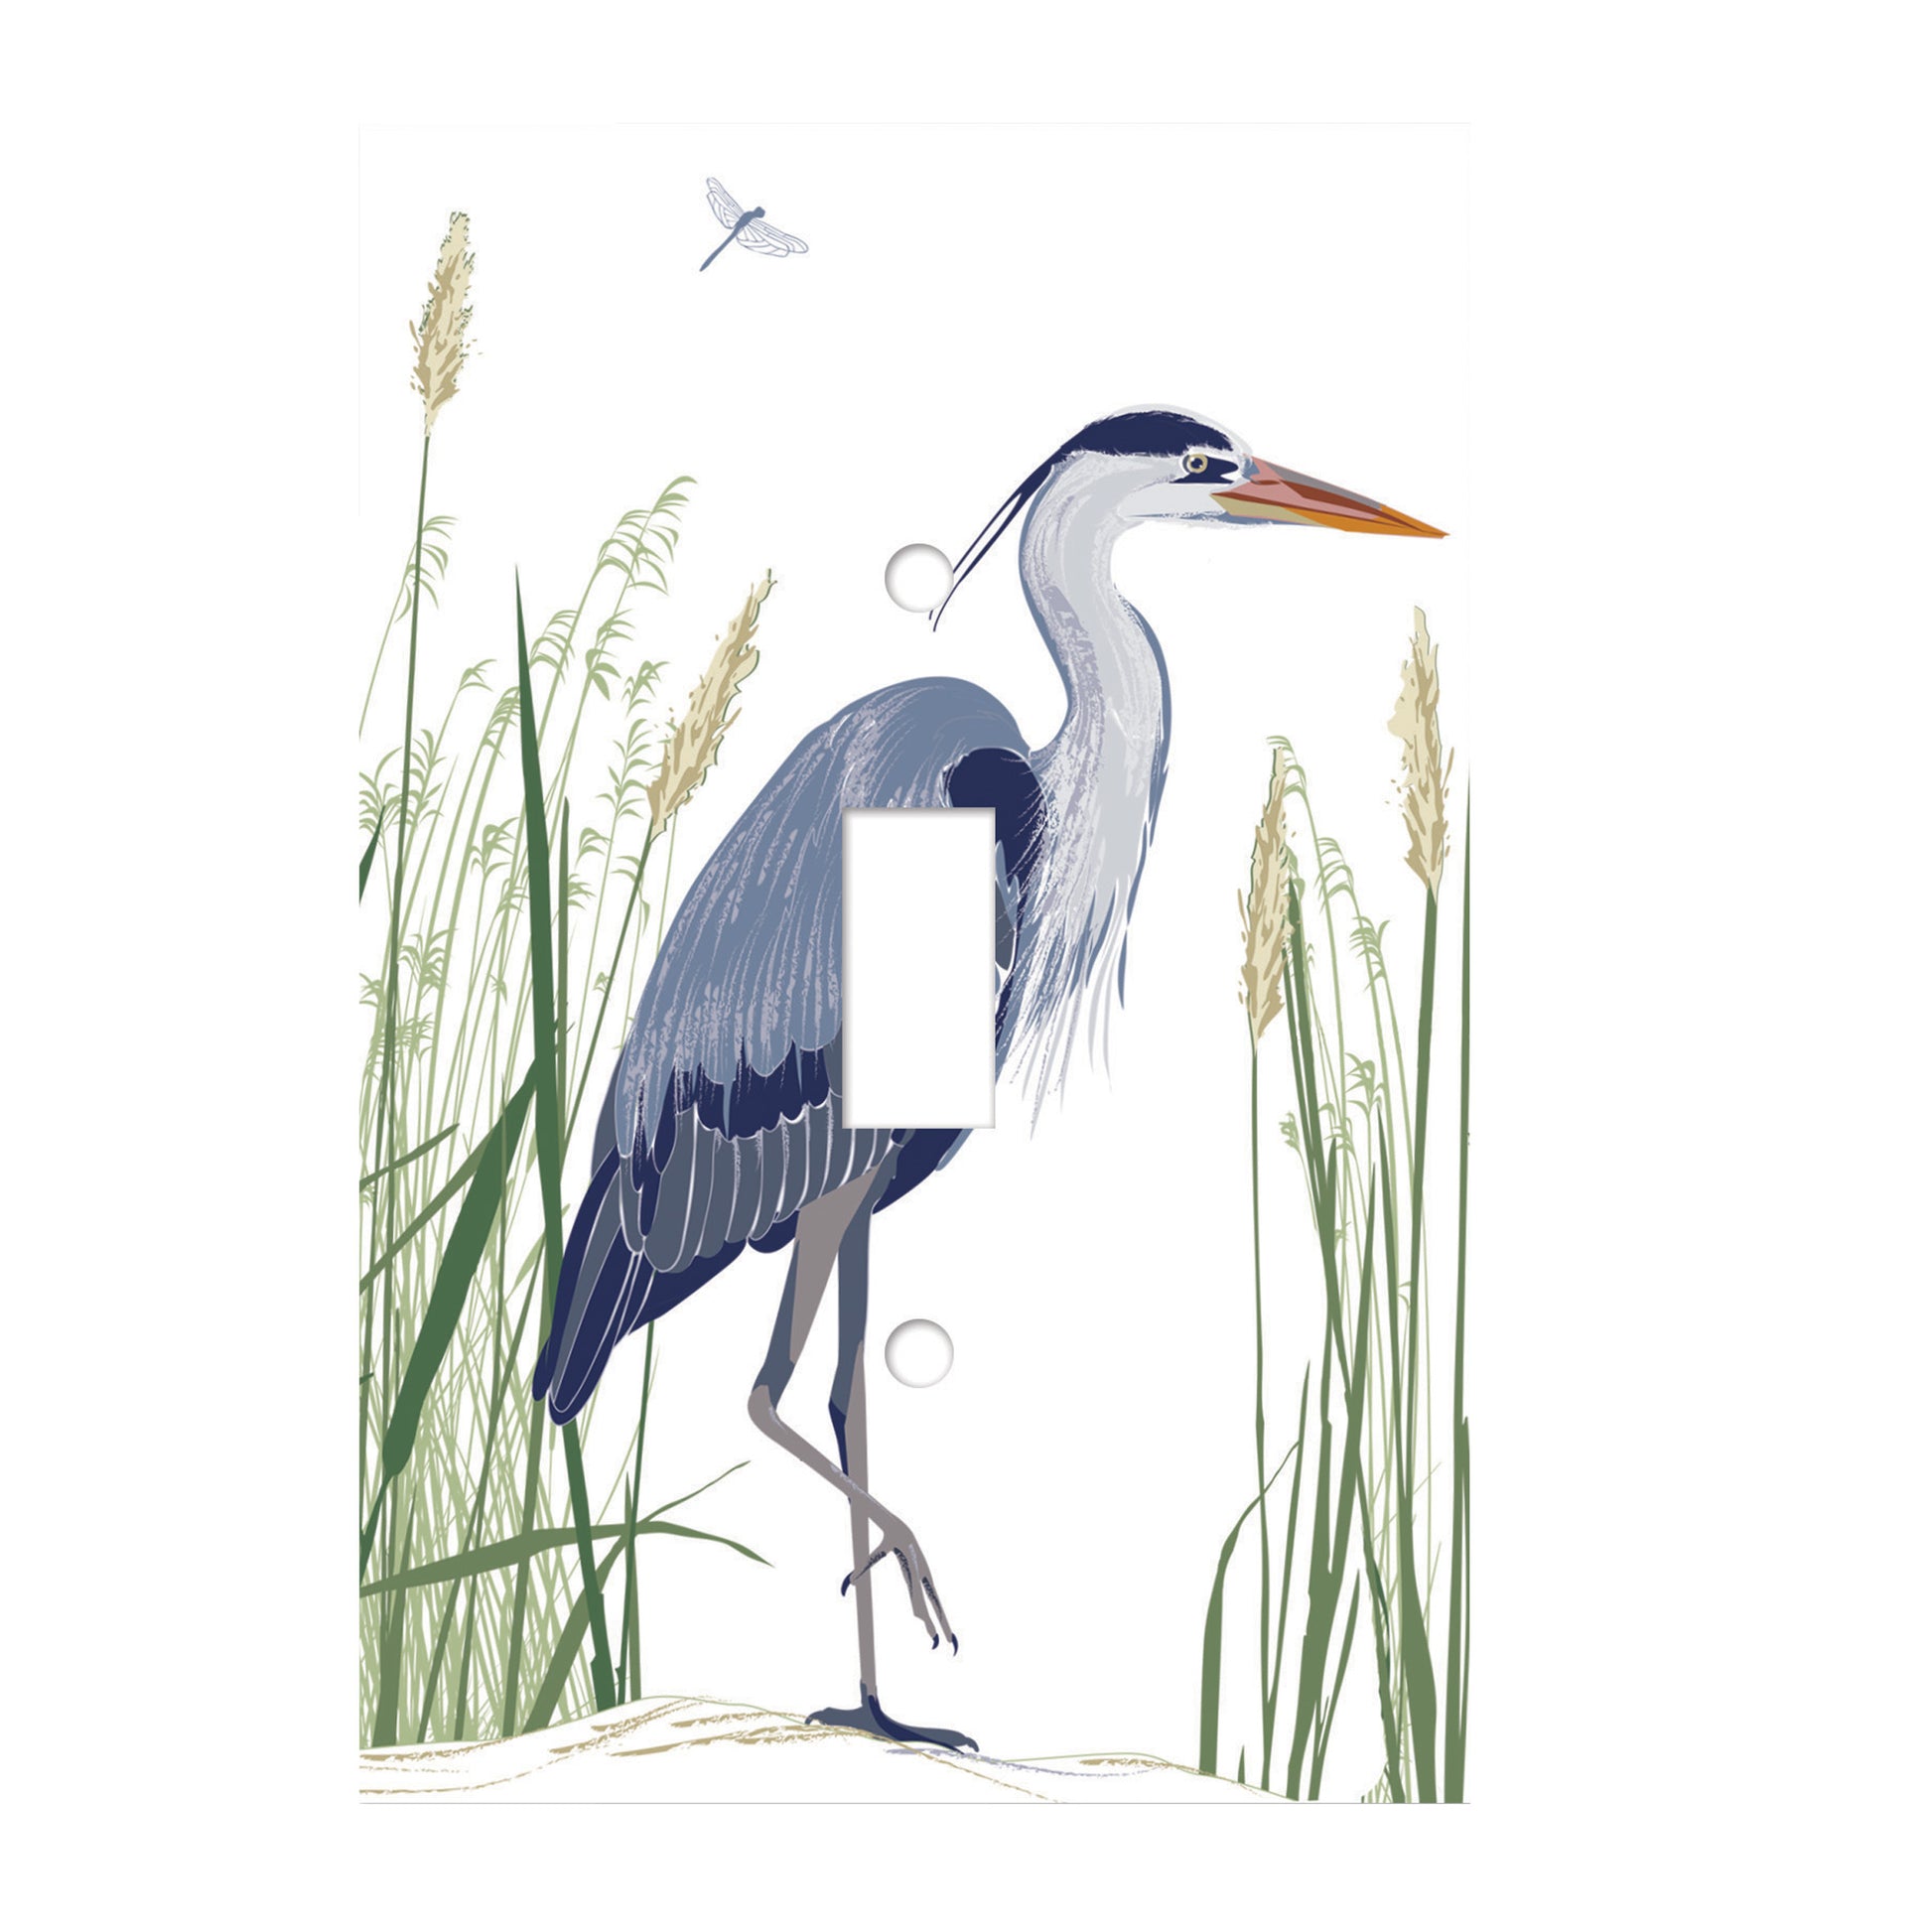 ceramic single toggle switchplate featuring a blue heron standing among grassy reeds. 